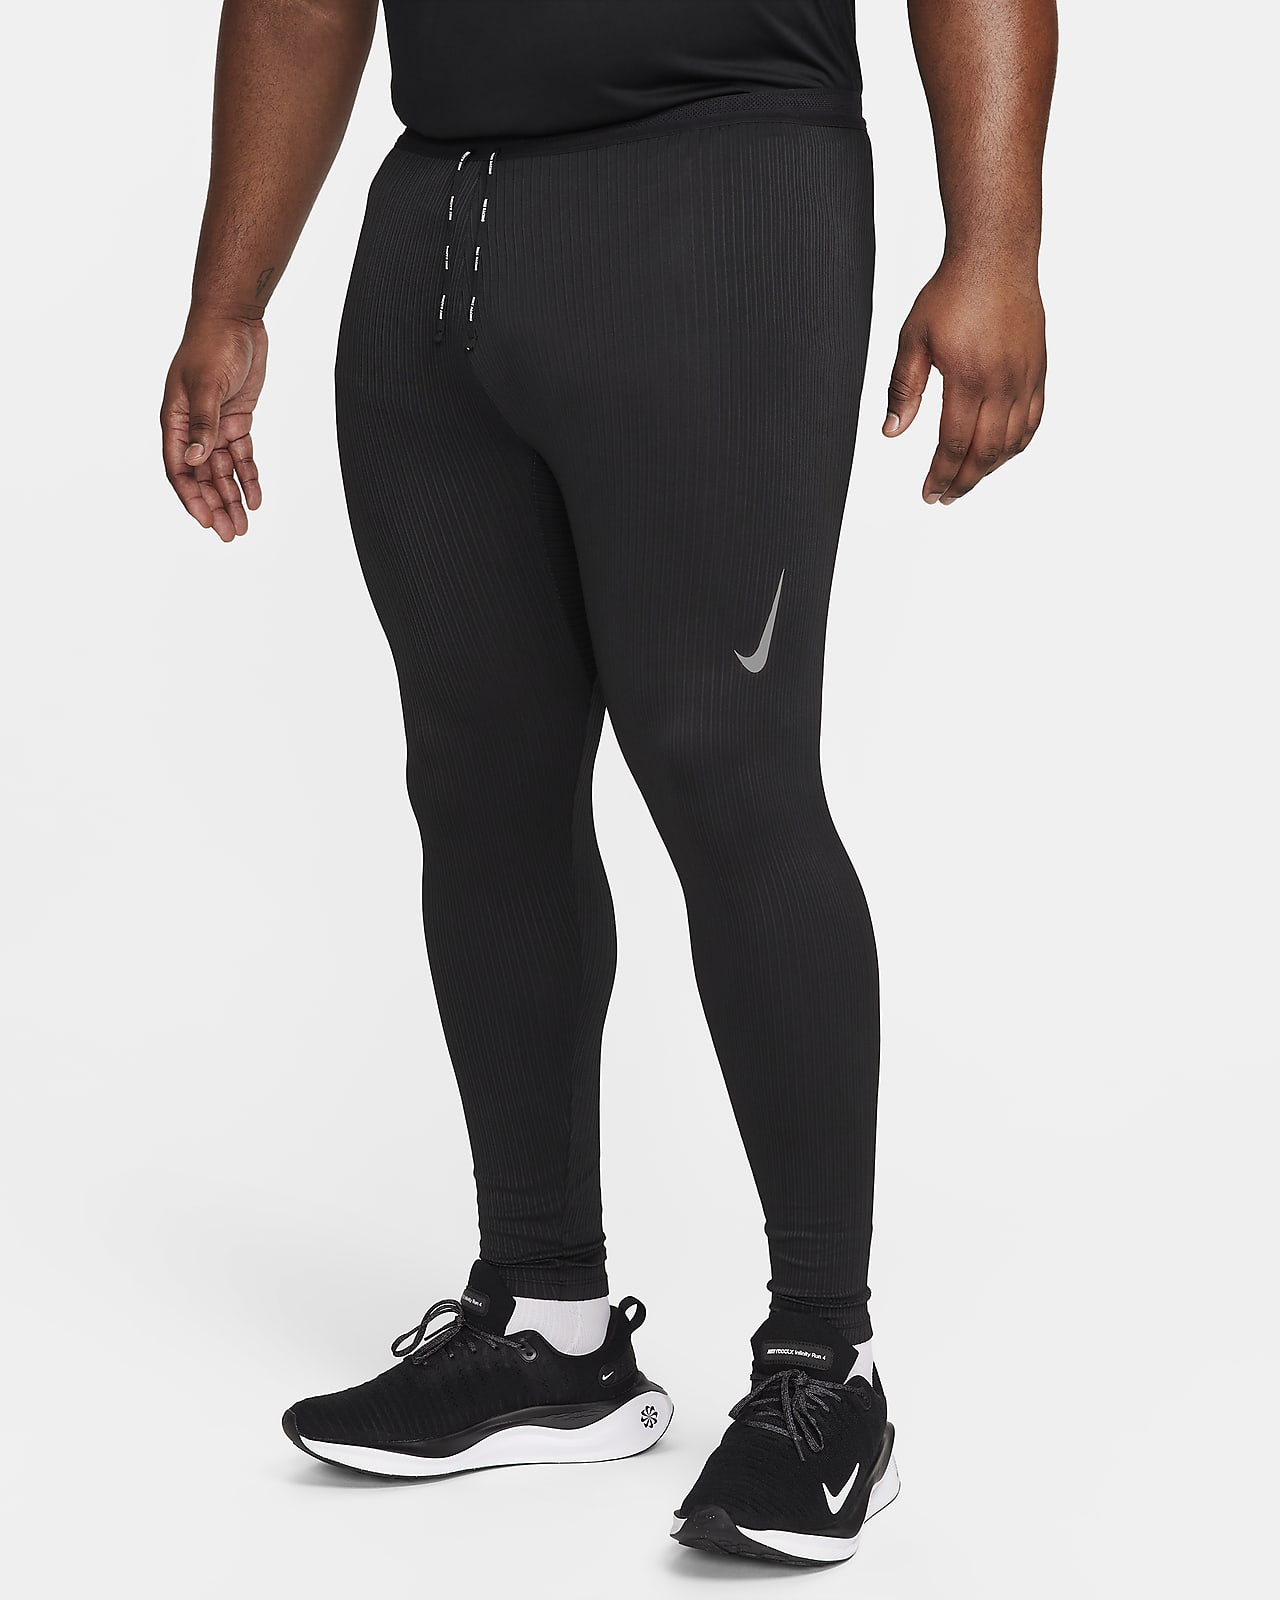 Benefits of Running in Tights. Nike UK